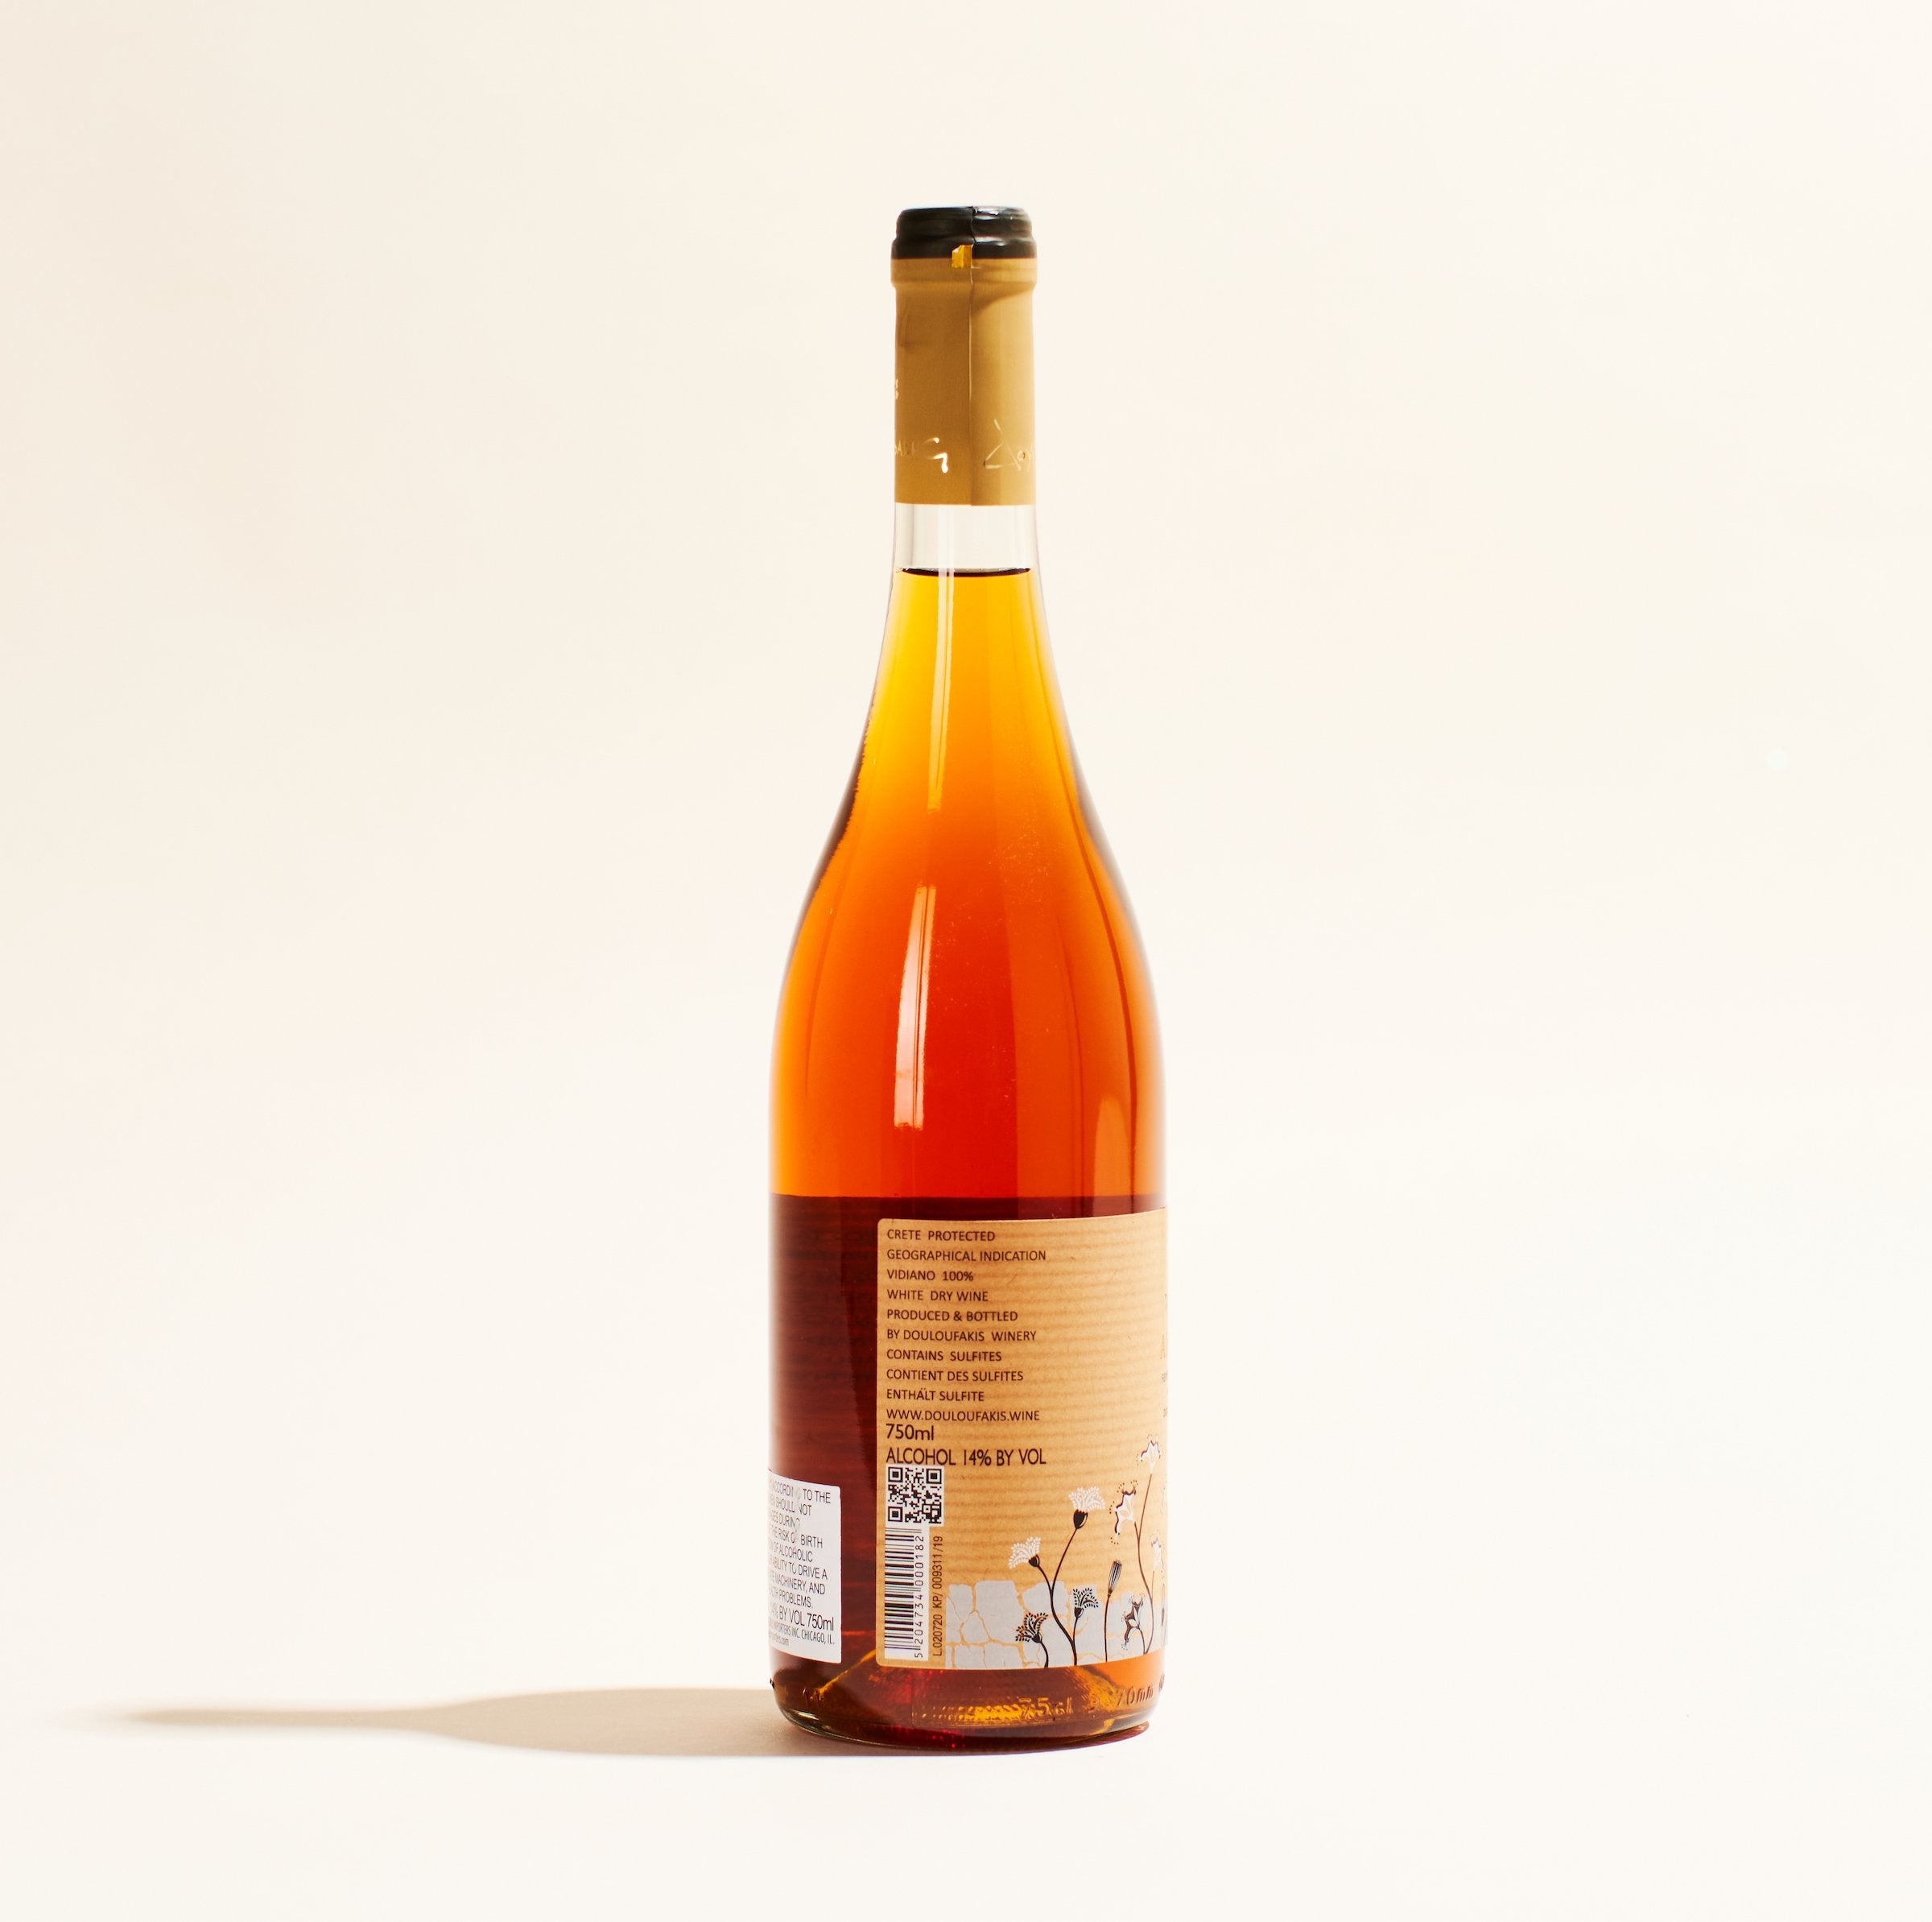 vidiano amphora douloufakis natural wine left siide label